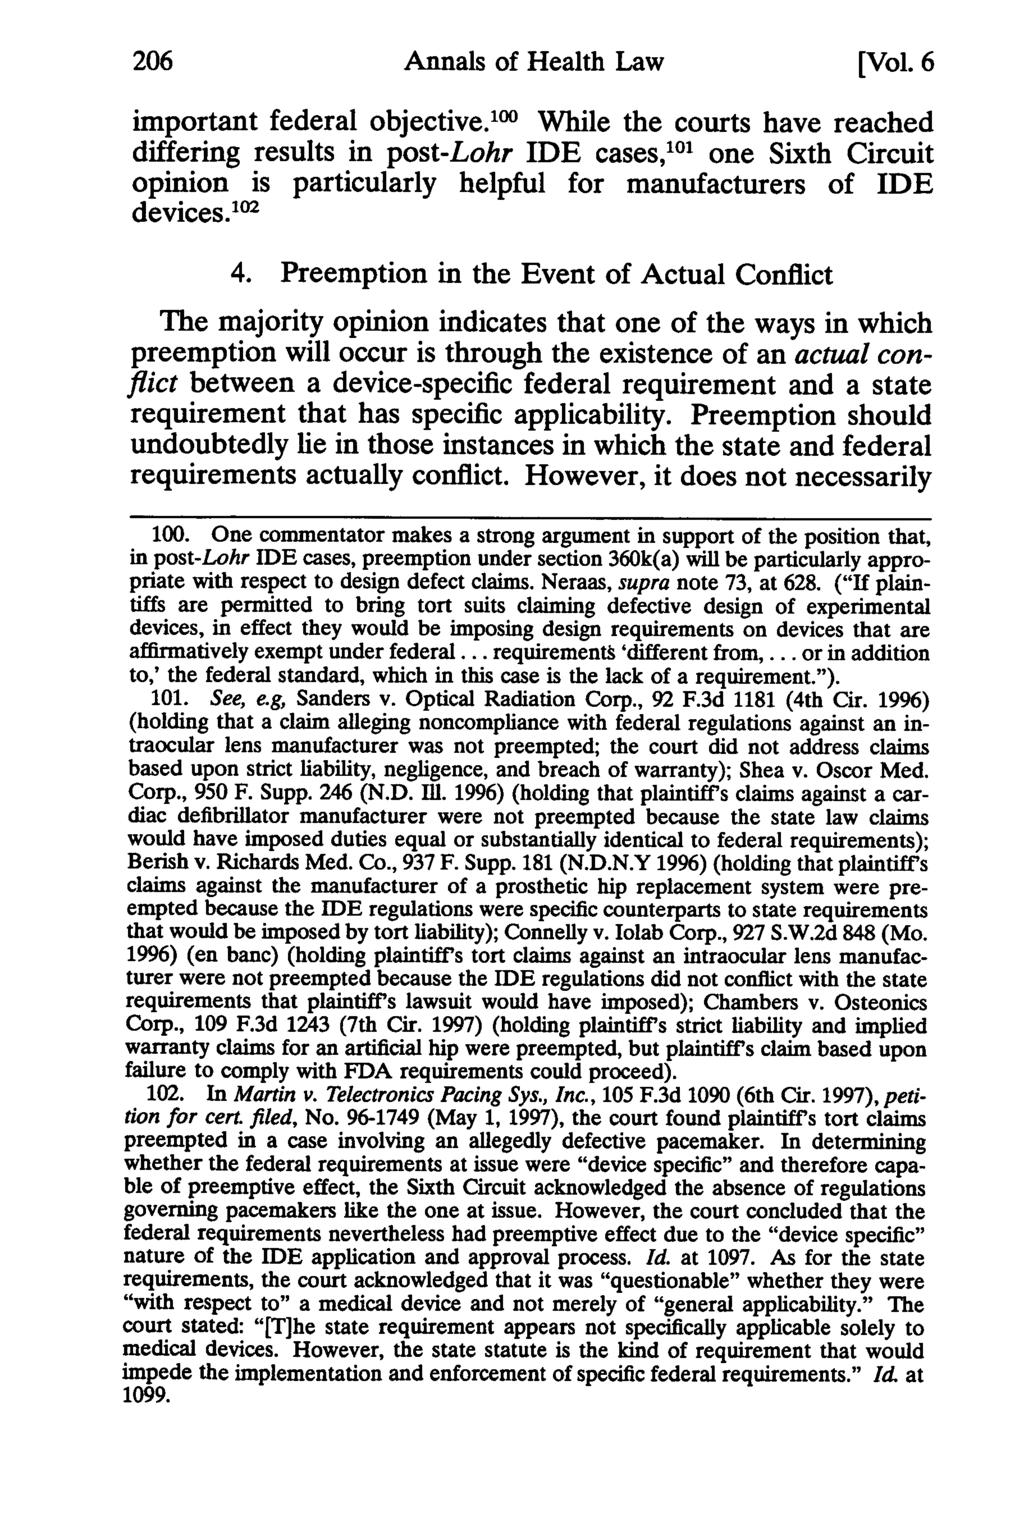 206 Annals of Health Annals Law, Vol. of 6 Health [1997], Iss. Law 1, Art. 10 [Vol. 6 important federal objective.